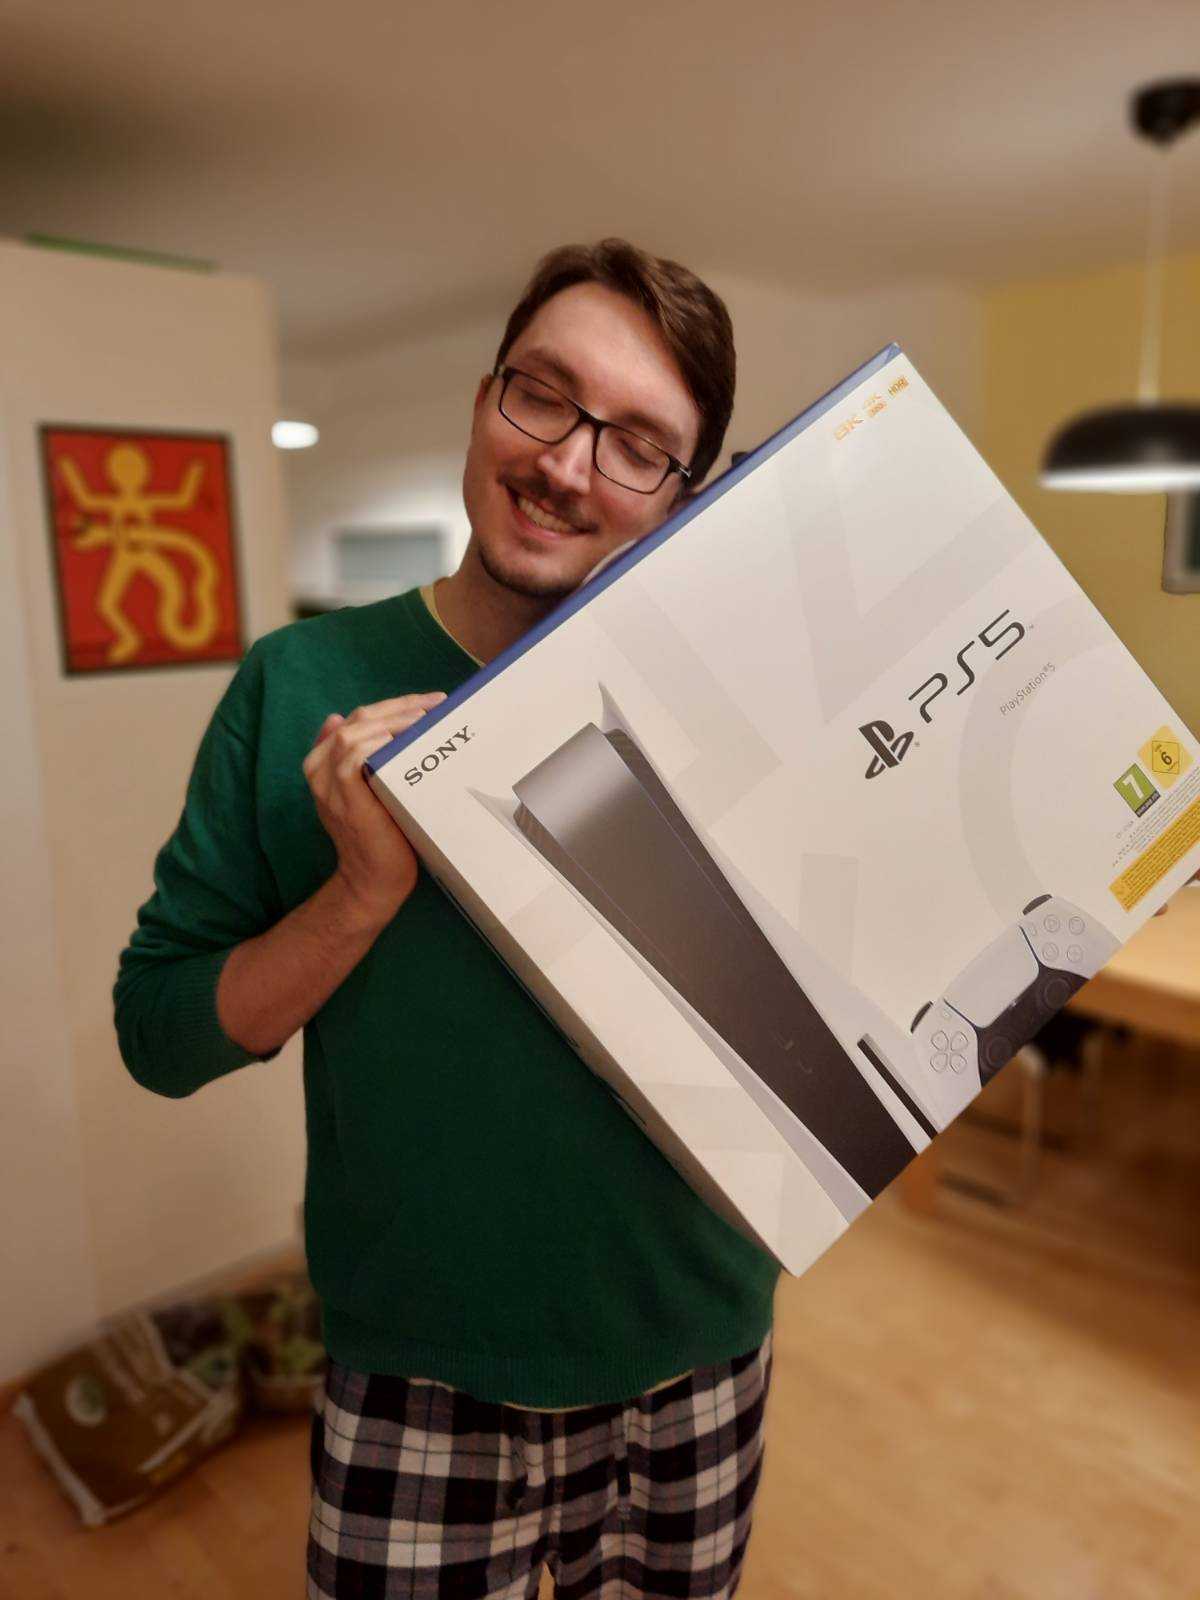 Me holding my beloved Playstation 5 still in its cardboard box